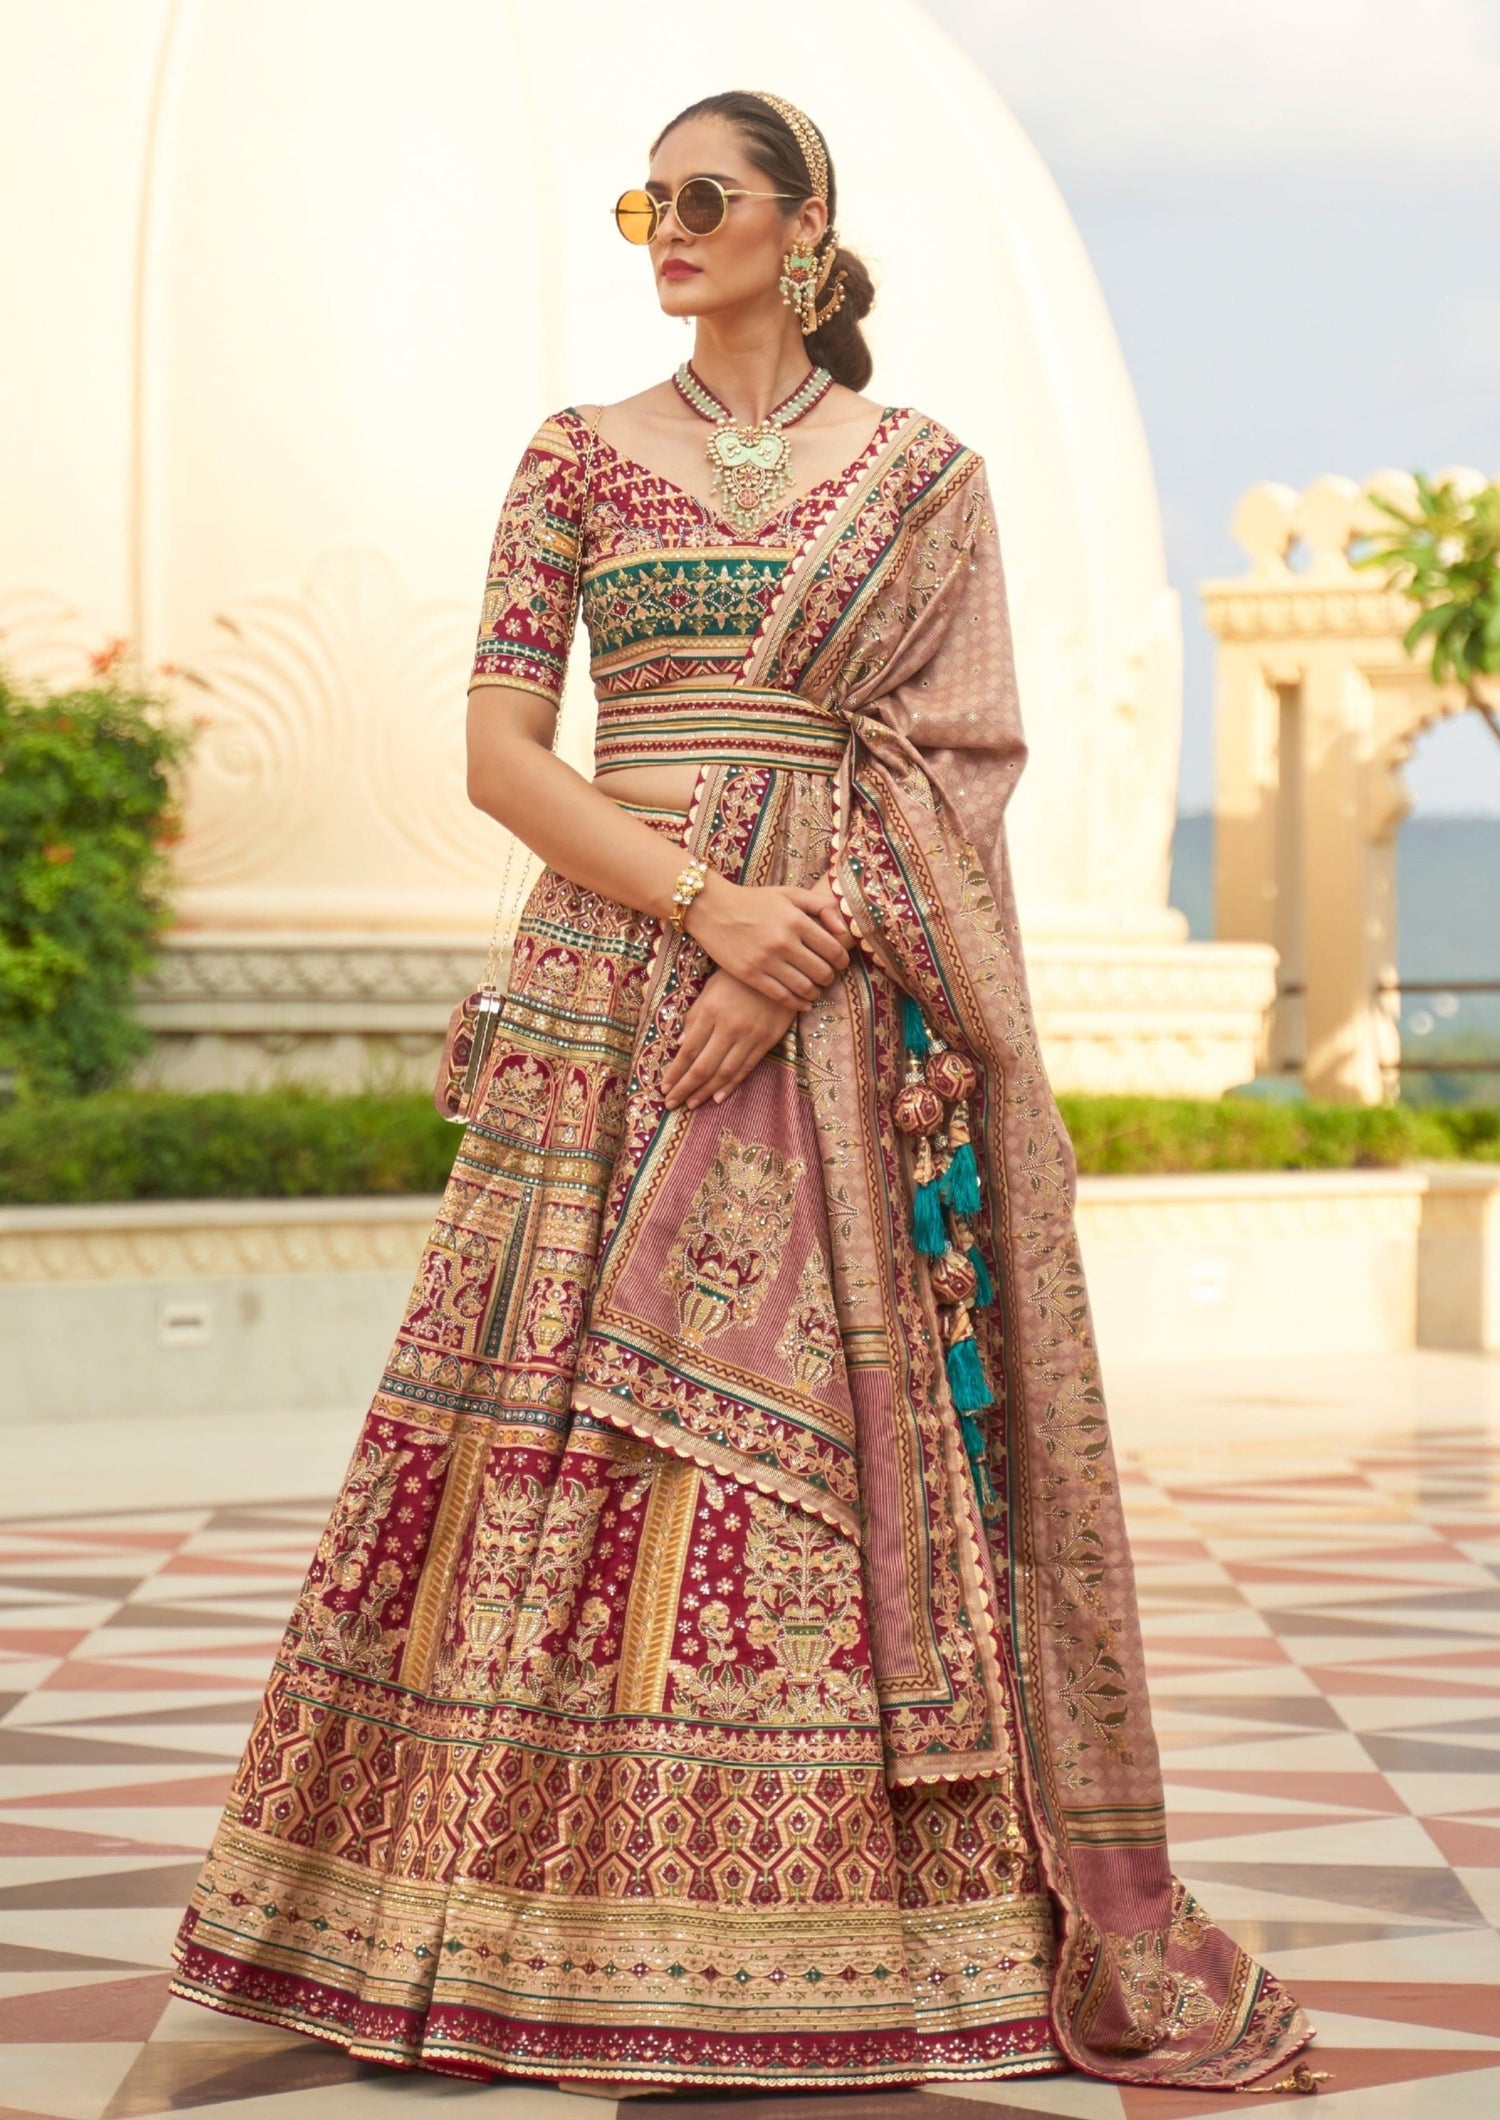 bride in red and green lehenga choli with dupatta